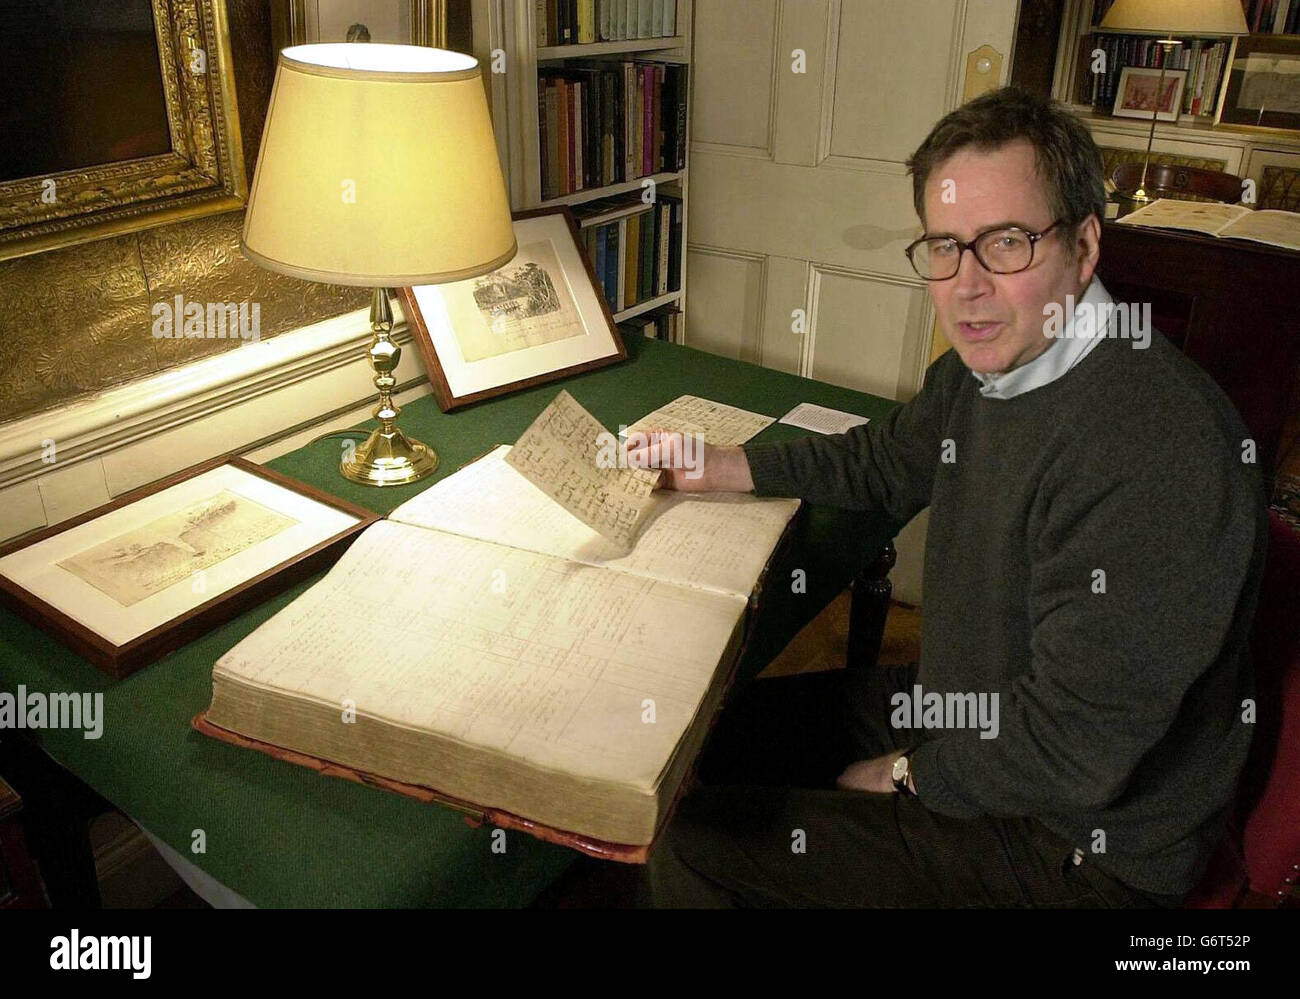 Publisher John Murray examines a letter and a ledger written by Dr Livingstone on his exploratory journey to South Africa at the John Murray Archive in Central London, ahead of a funding announcement to be made by Scottish Executive Culture Minister Frank McAveety at the National Library of Scotland in Edinburgh. The unique collection of writings from some of history's most celebrated authors, explorers and scientists, which has been valued at 45m, is heading home to Scotland. Stock Photo